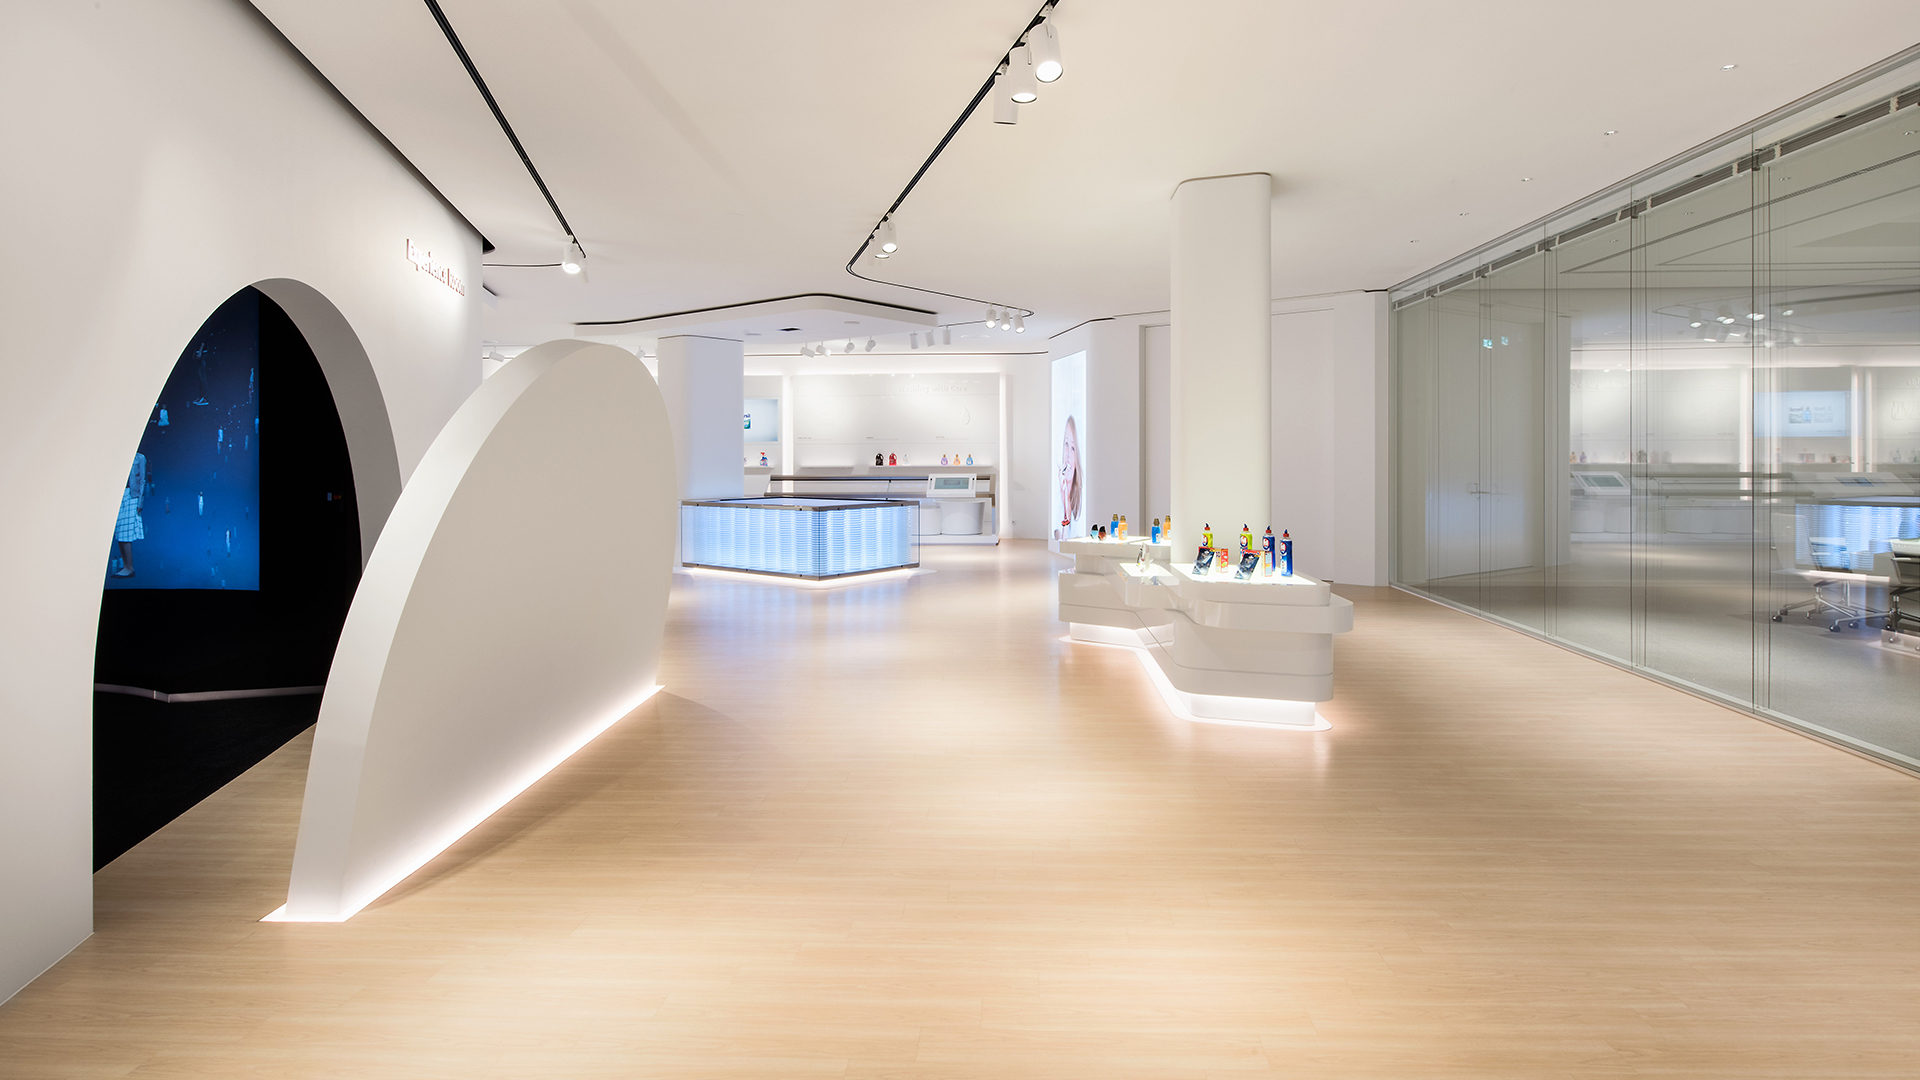 Dart stages the exhibition Global Experience Center 2015 in Dusseldorf for Henkel